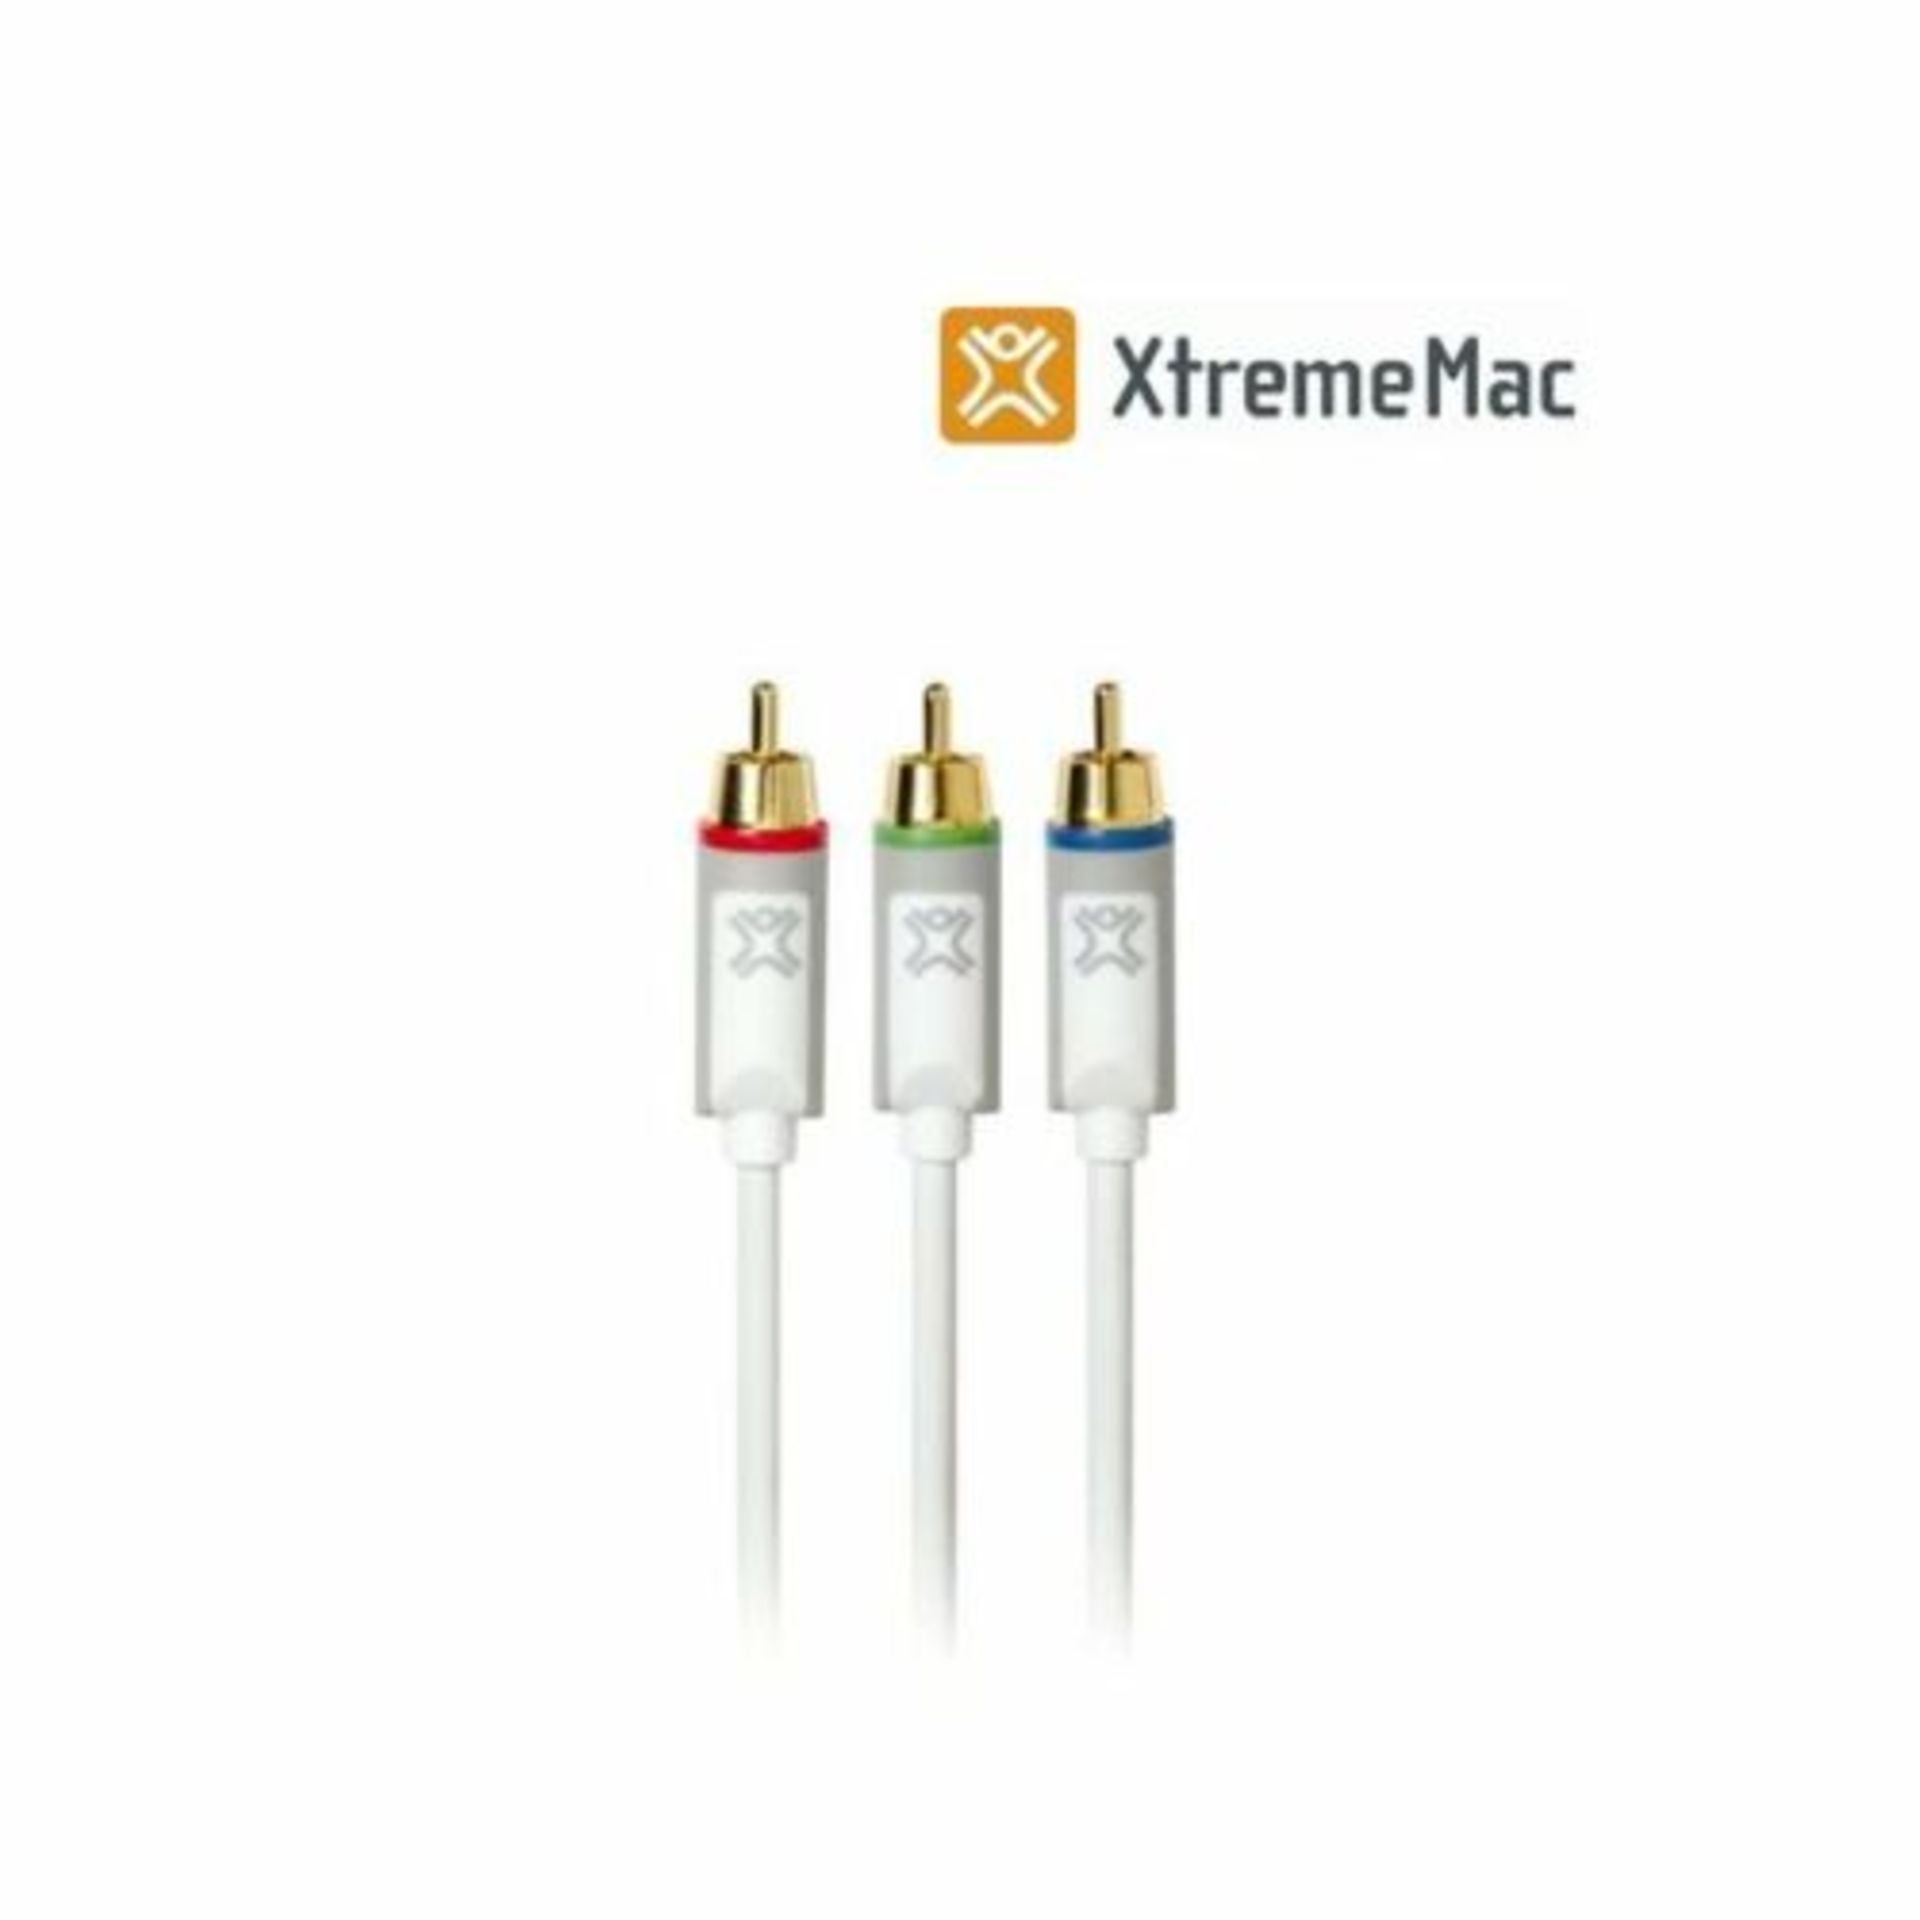 50 x XtremeHD Component Video Cable (4m) EU RCA Male Gold plated - Image 3 of 5